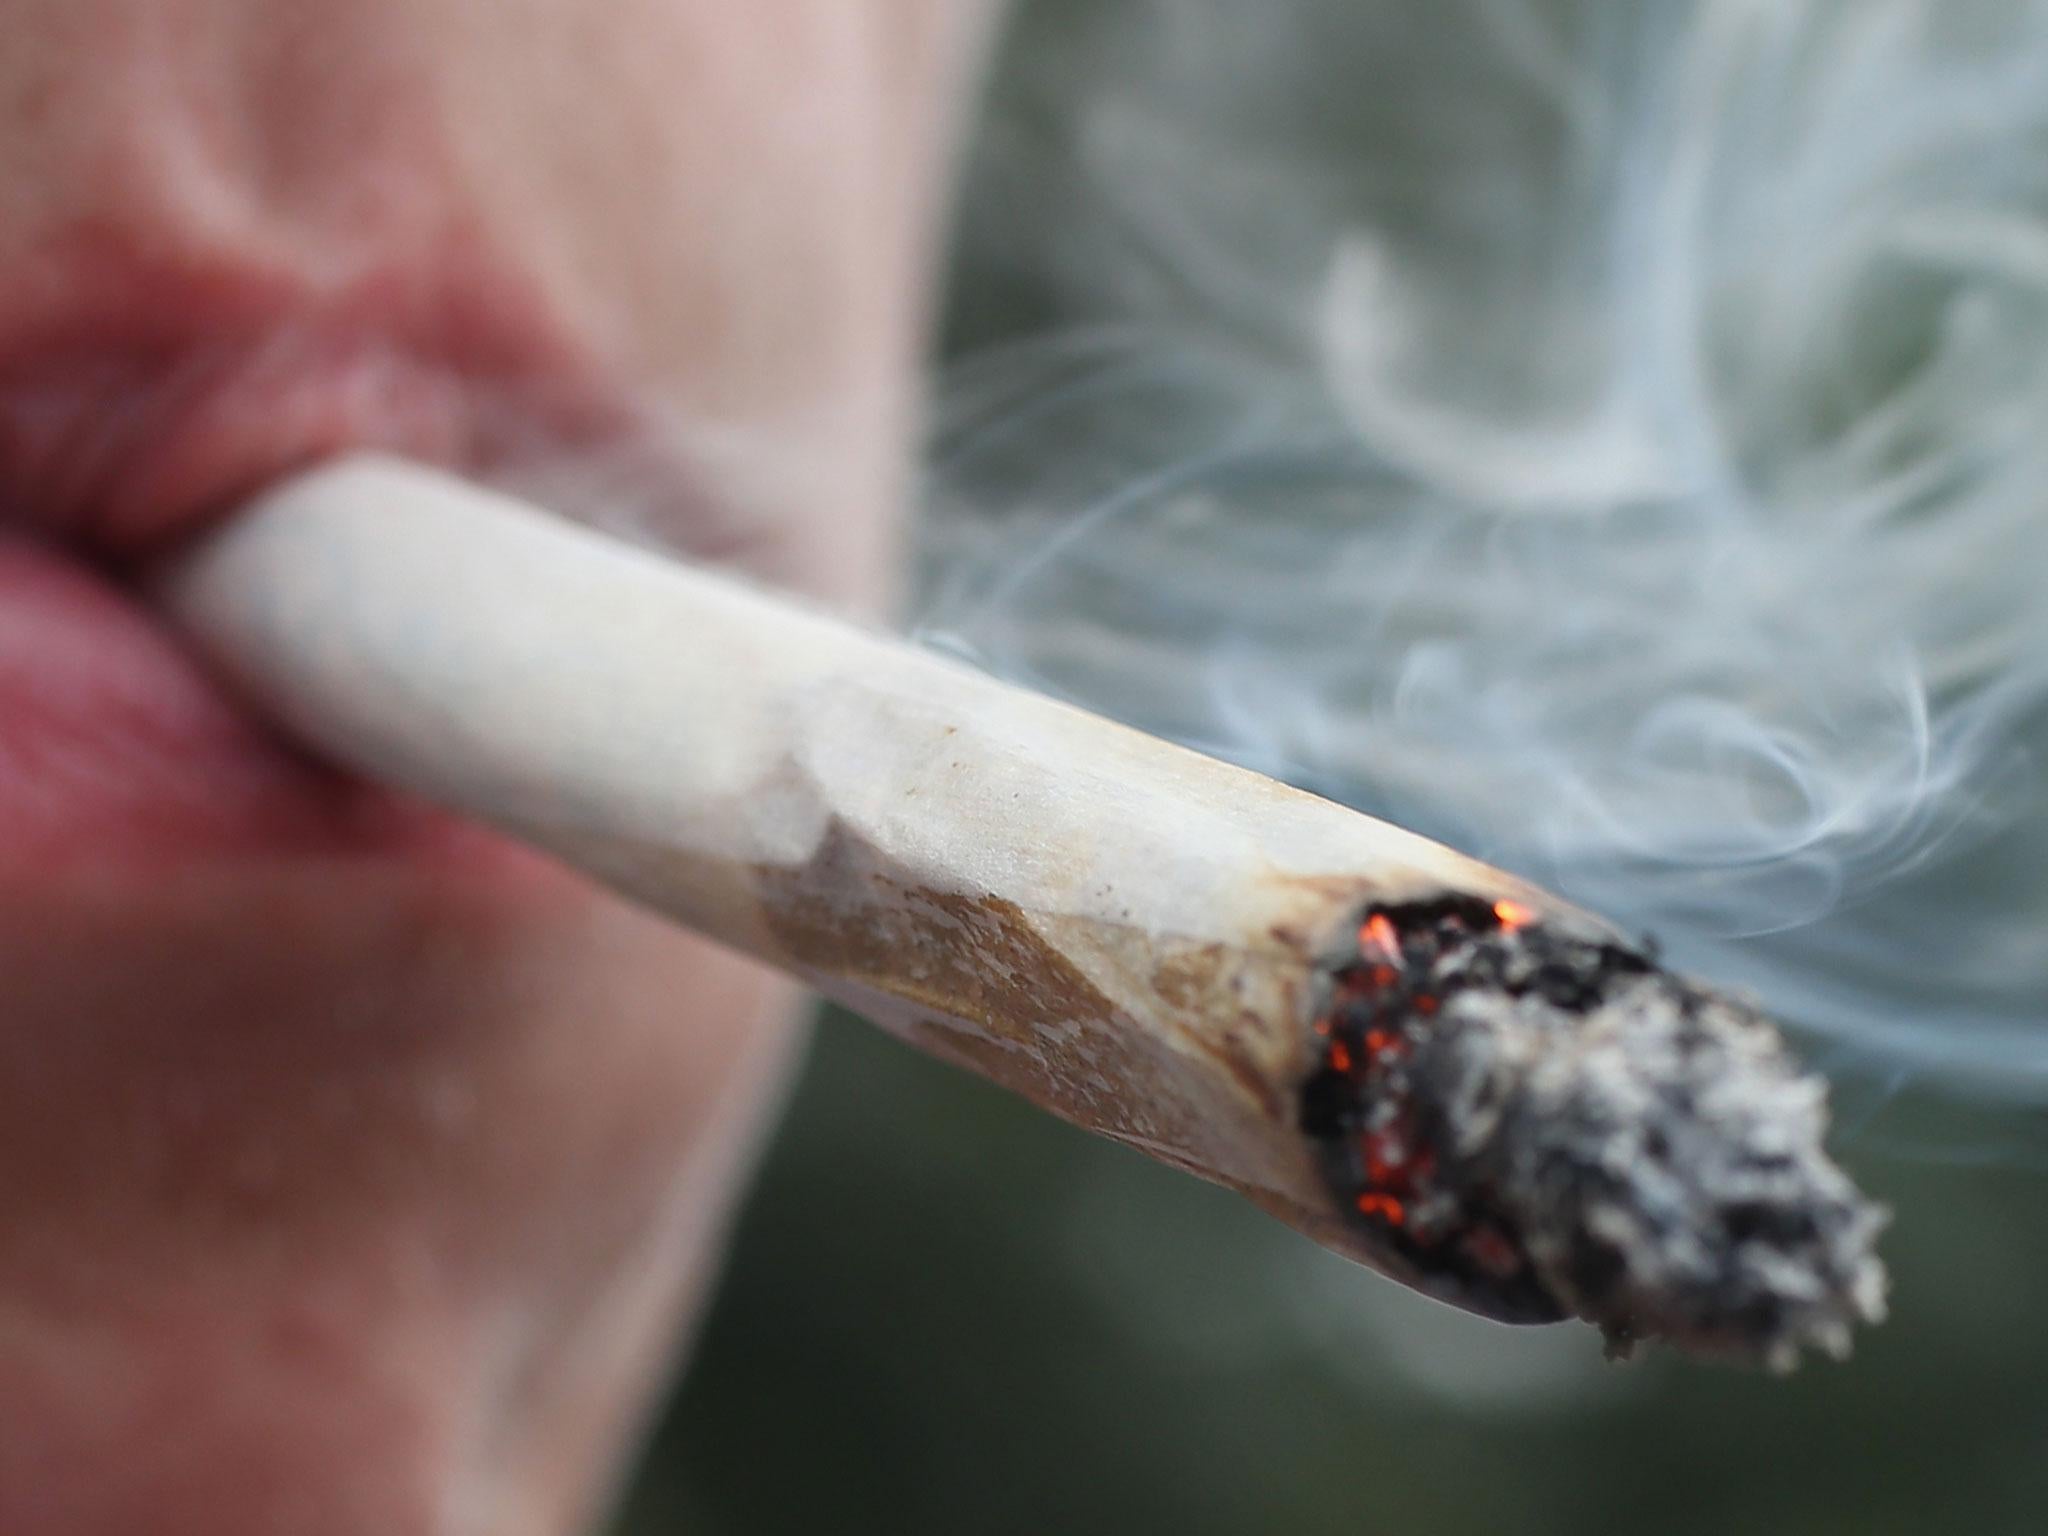 The marijuana trend defies the warnings of those who oppose its legalisation